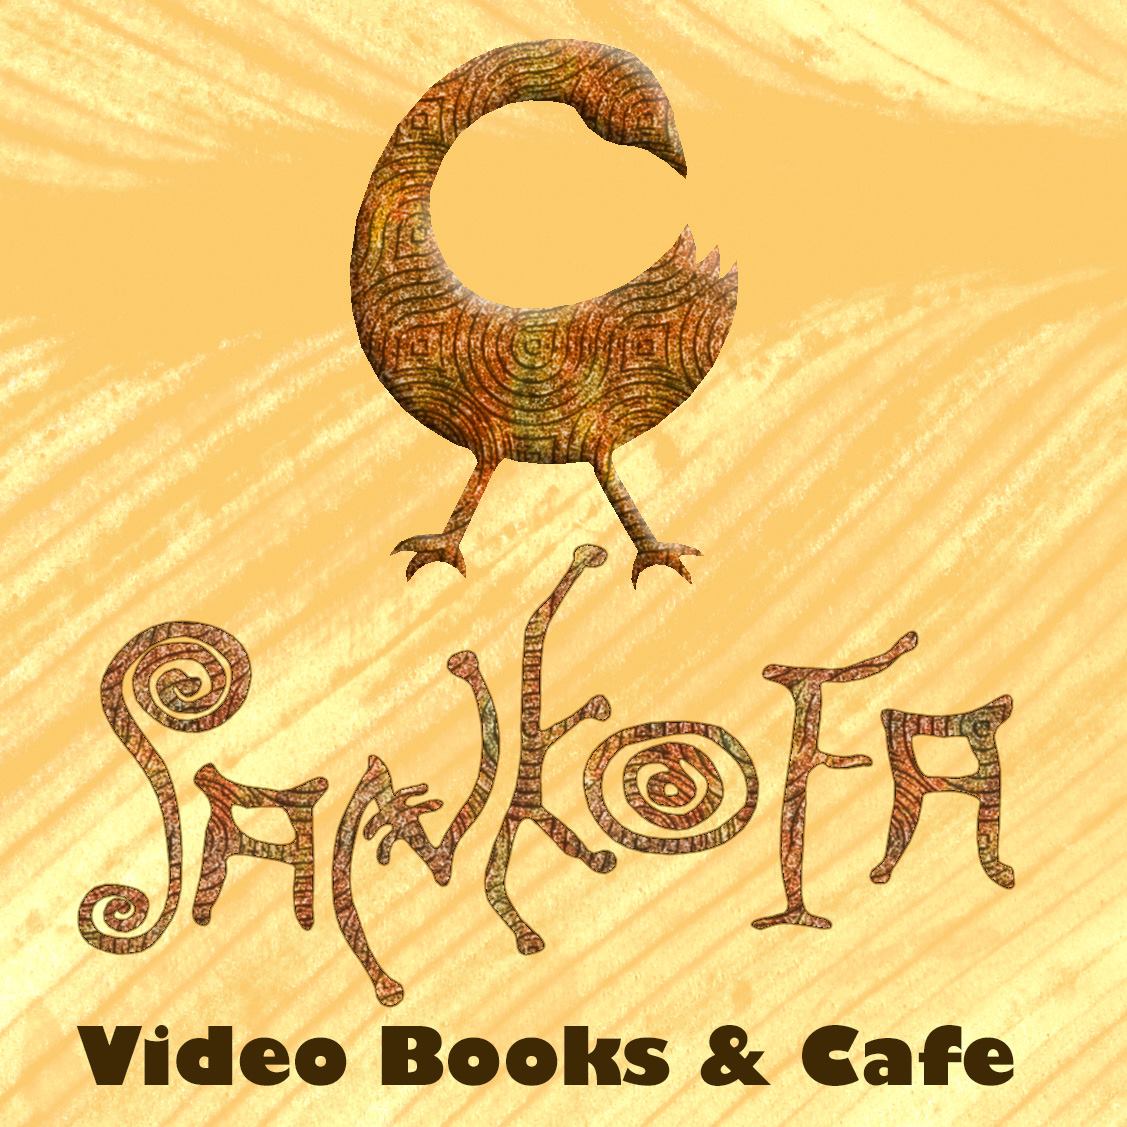 Sankofa Video Books And Cafe Features African Cuisine In Washington District Of Columbia 